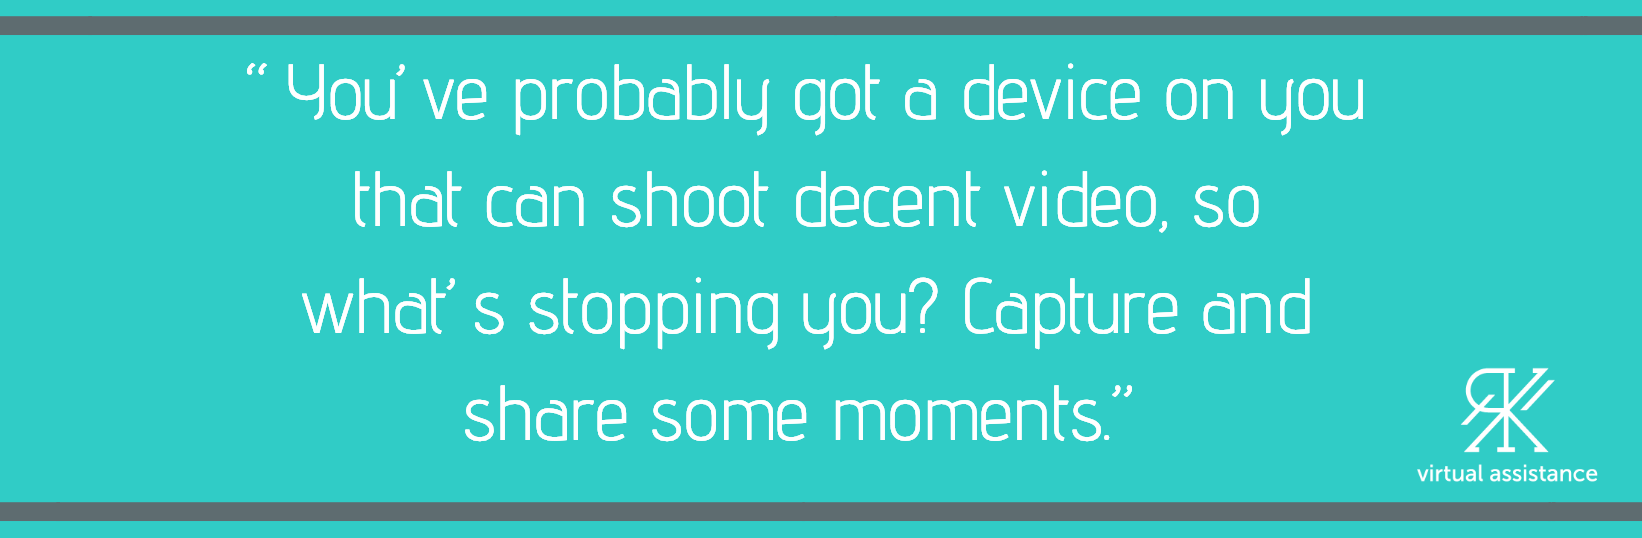 Engaging Video Content - What Is Stopping You?